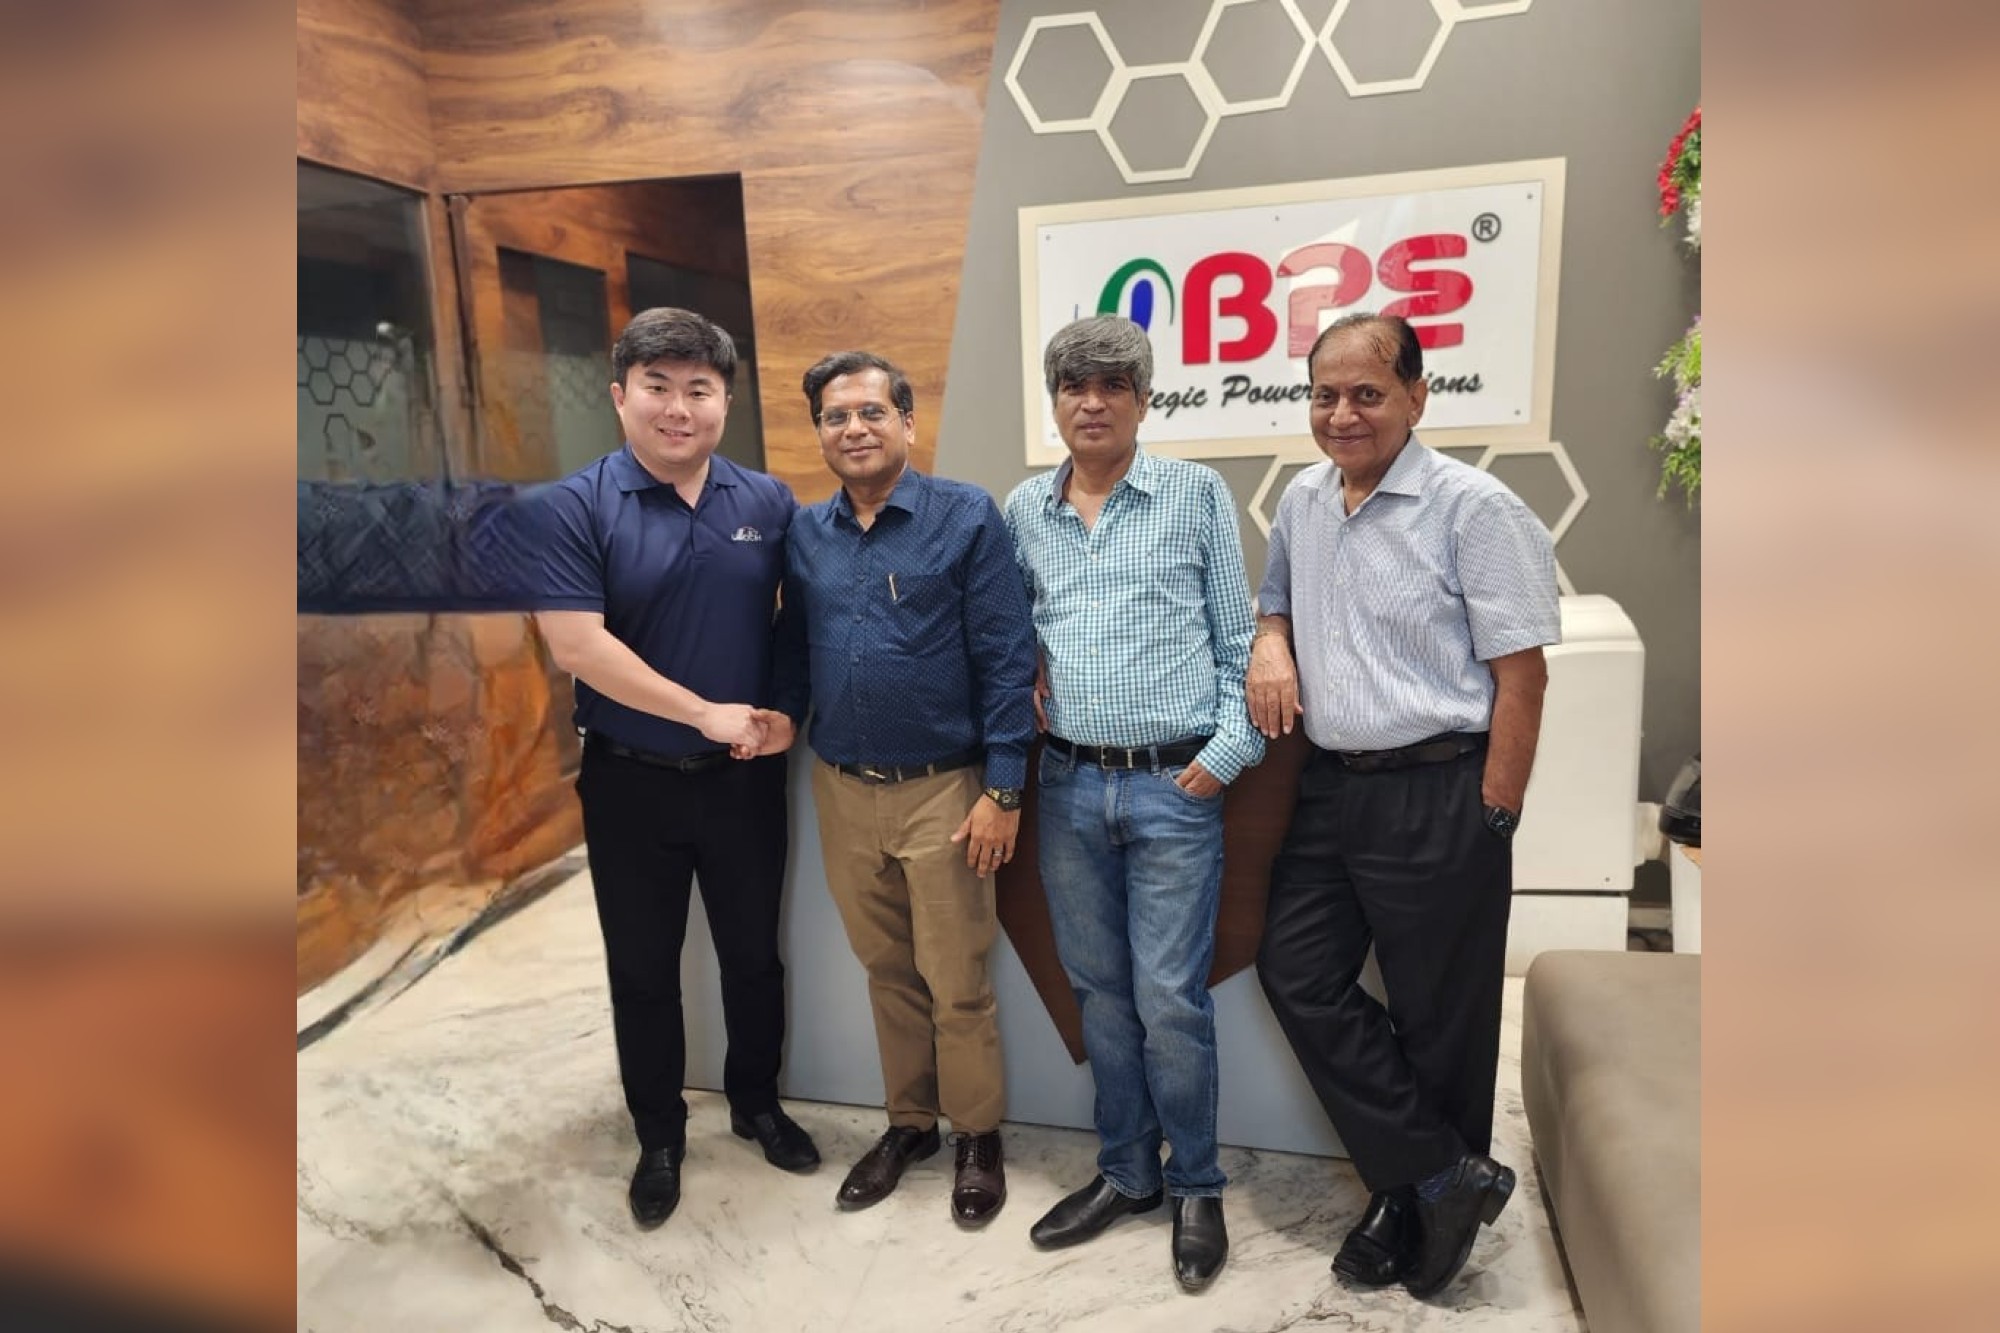 Best Power Equipments (BPE), a global leader in providing innovative power solutions, announces the appointment of Sam Teo as President – ASEAN to be based at BPE’s Regional Headquarter in Singapore.